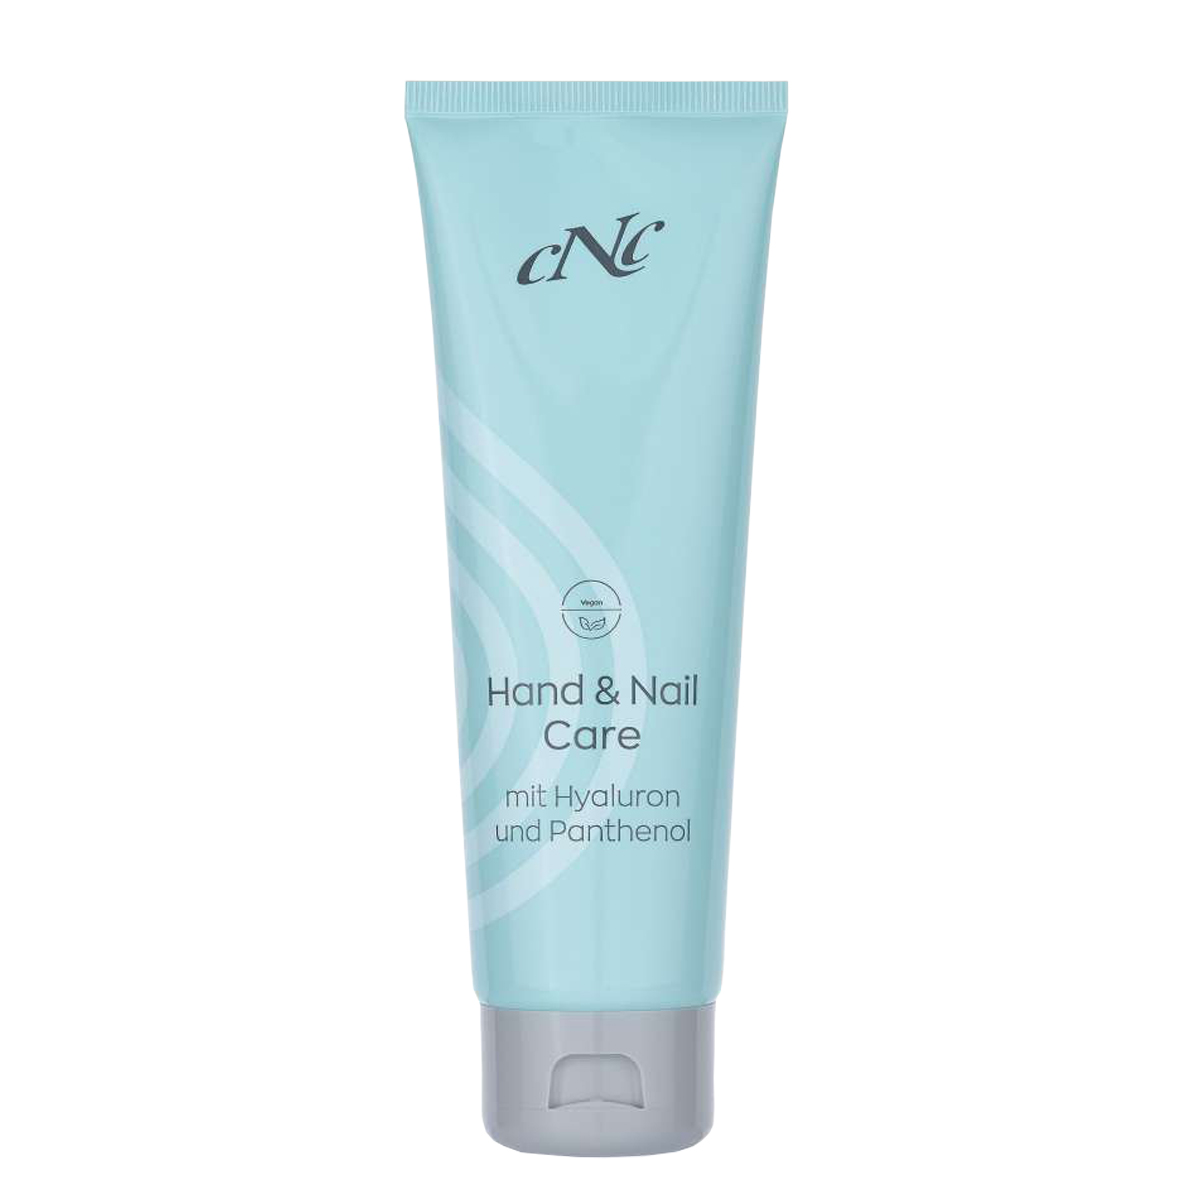 CNC Cosmetic Hand und Nail Care mit Hyaluron125 ml